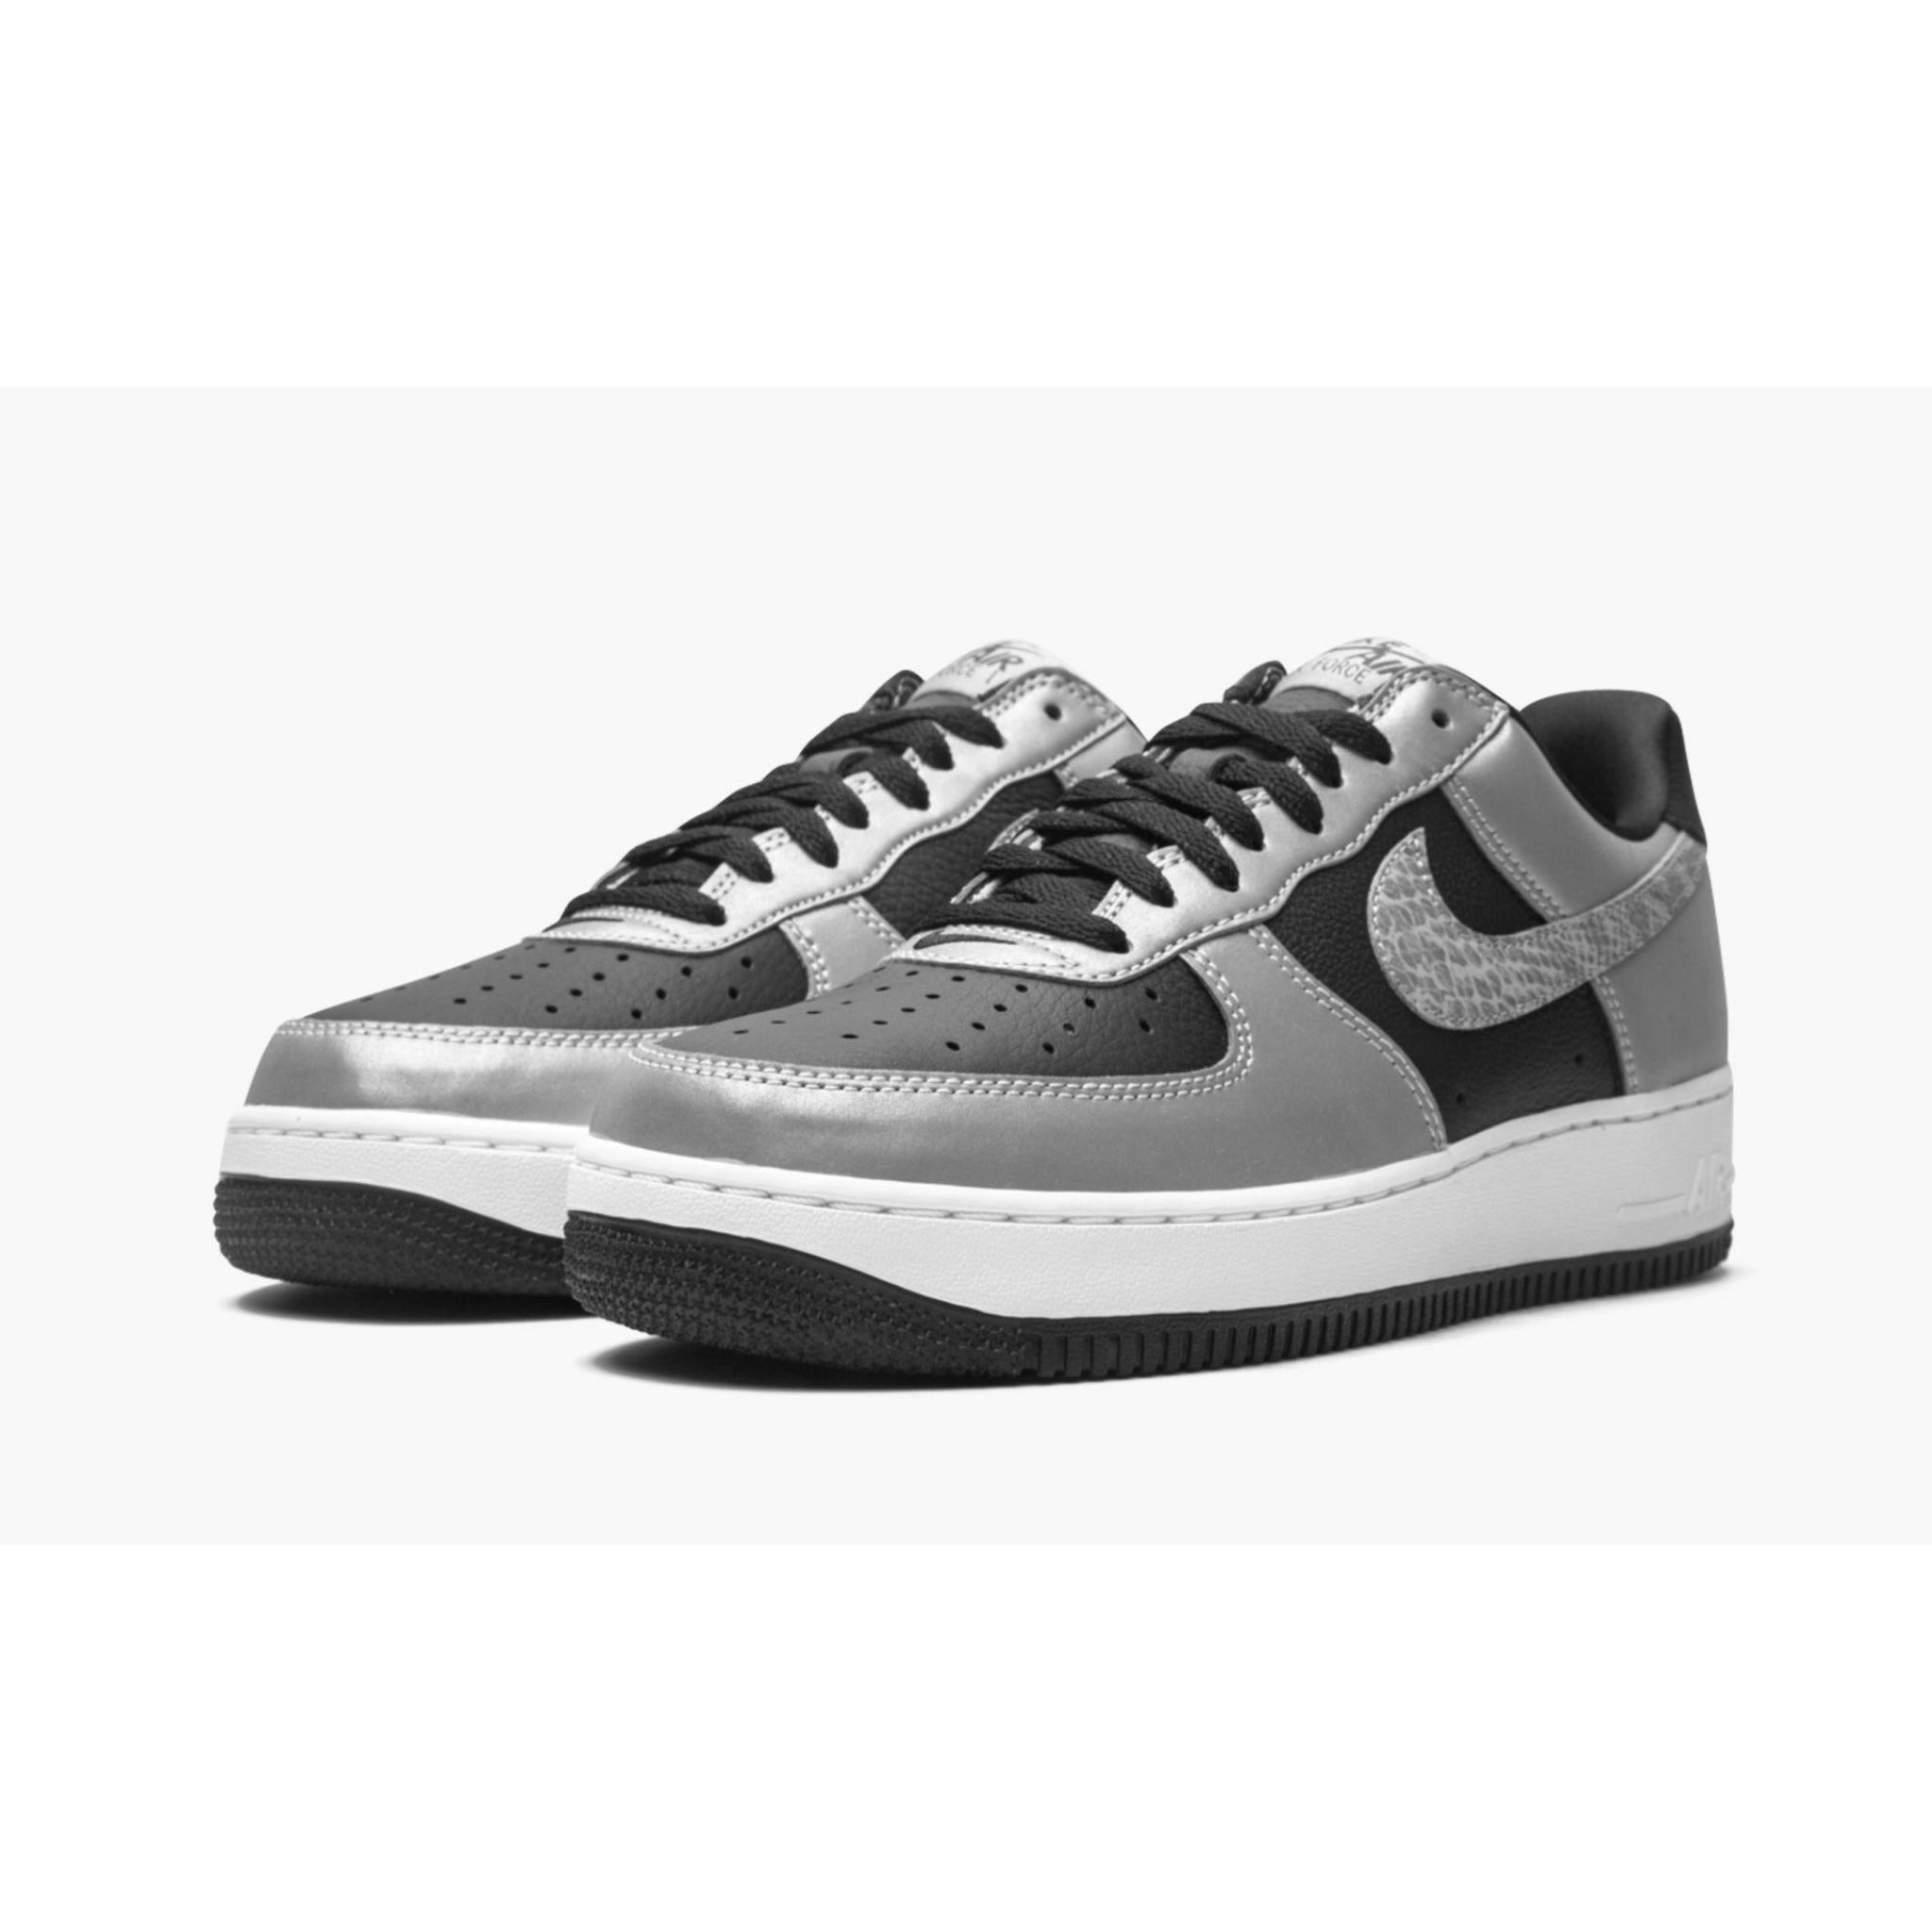 NIKE AIR FORCE 1 LOW "Silver Snake"